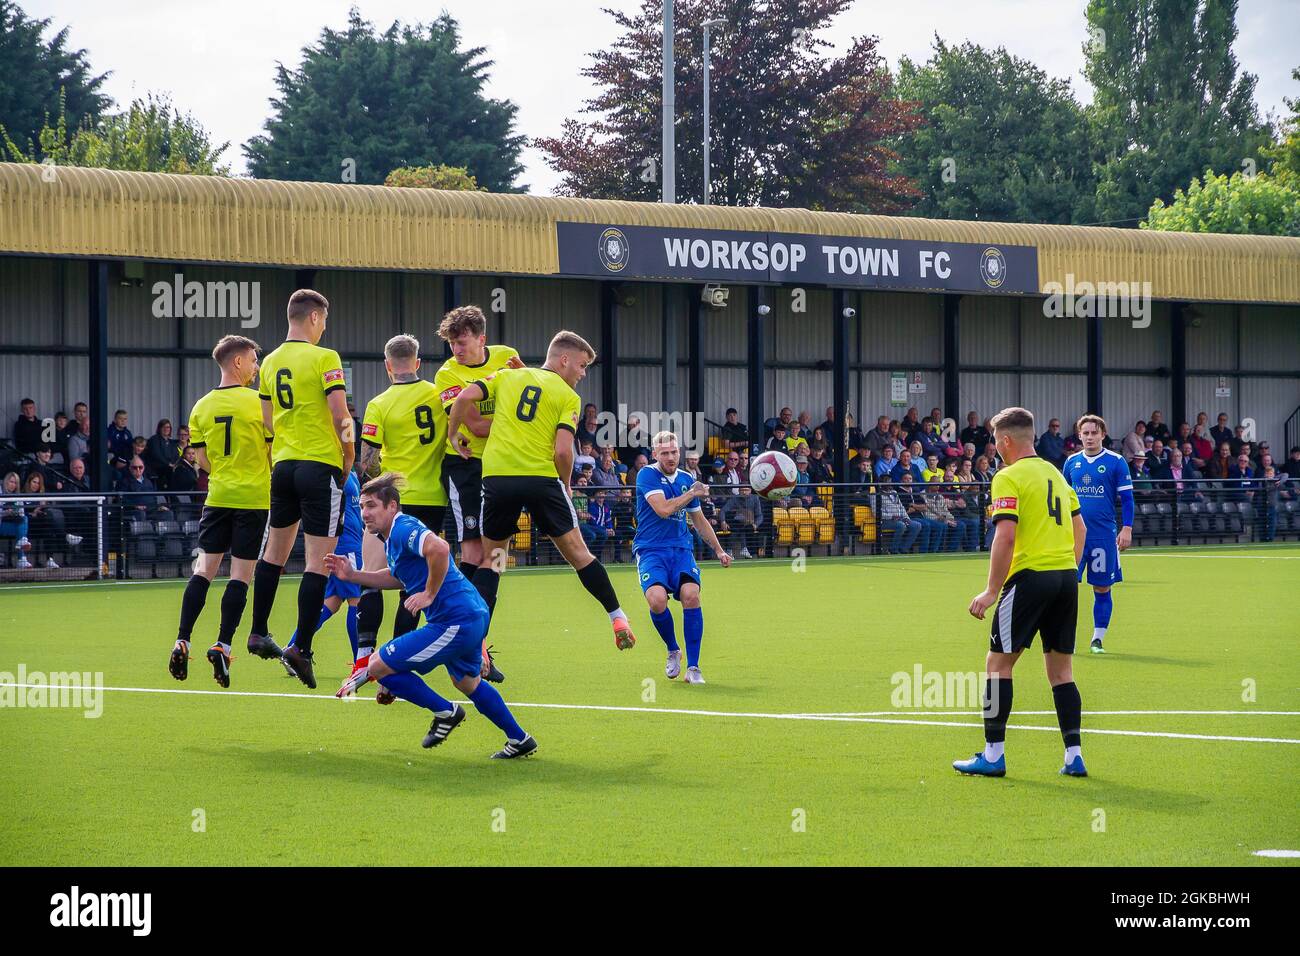 Worksop Town Football Club founded in 1861 worlds fourth oldest club playing Newport Pagnell Town in the 2021-21 FA Cup first qualifying round Stock Photo